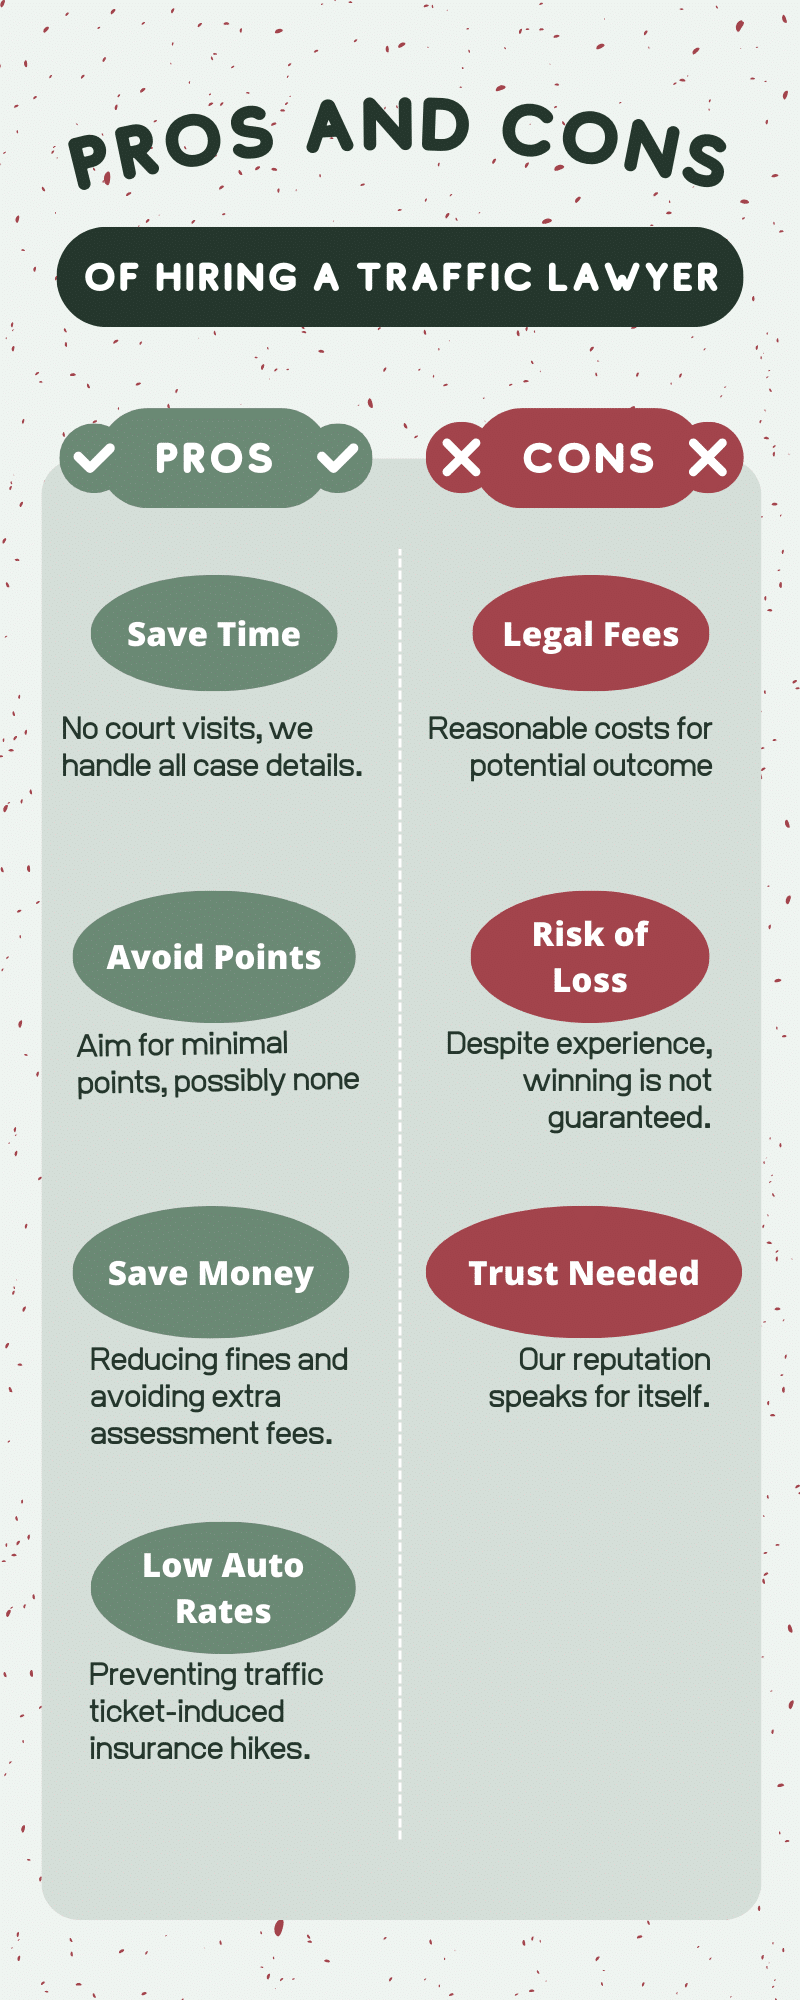 Pros and cons of hiring a traffic attorney infographic